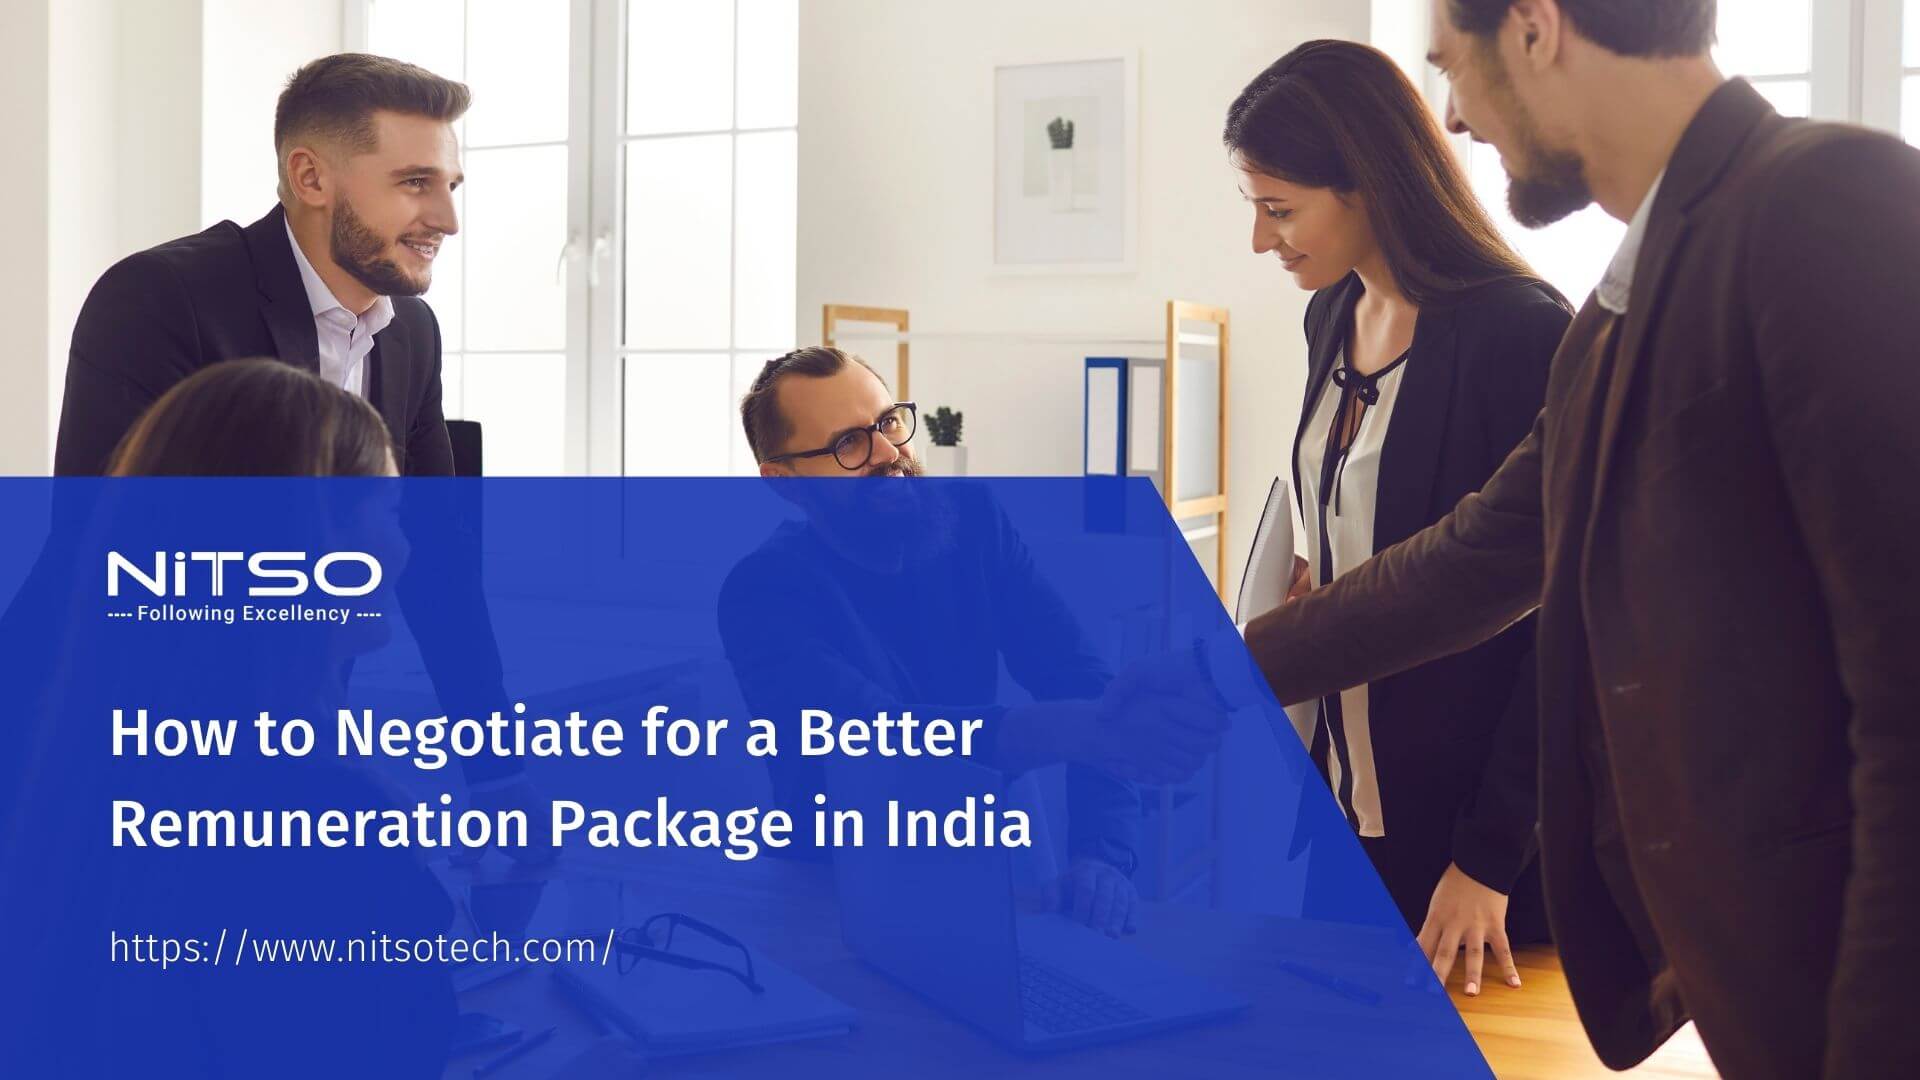 How to Negotiate for a Remuneration Package in India